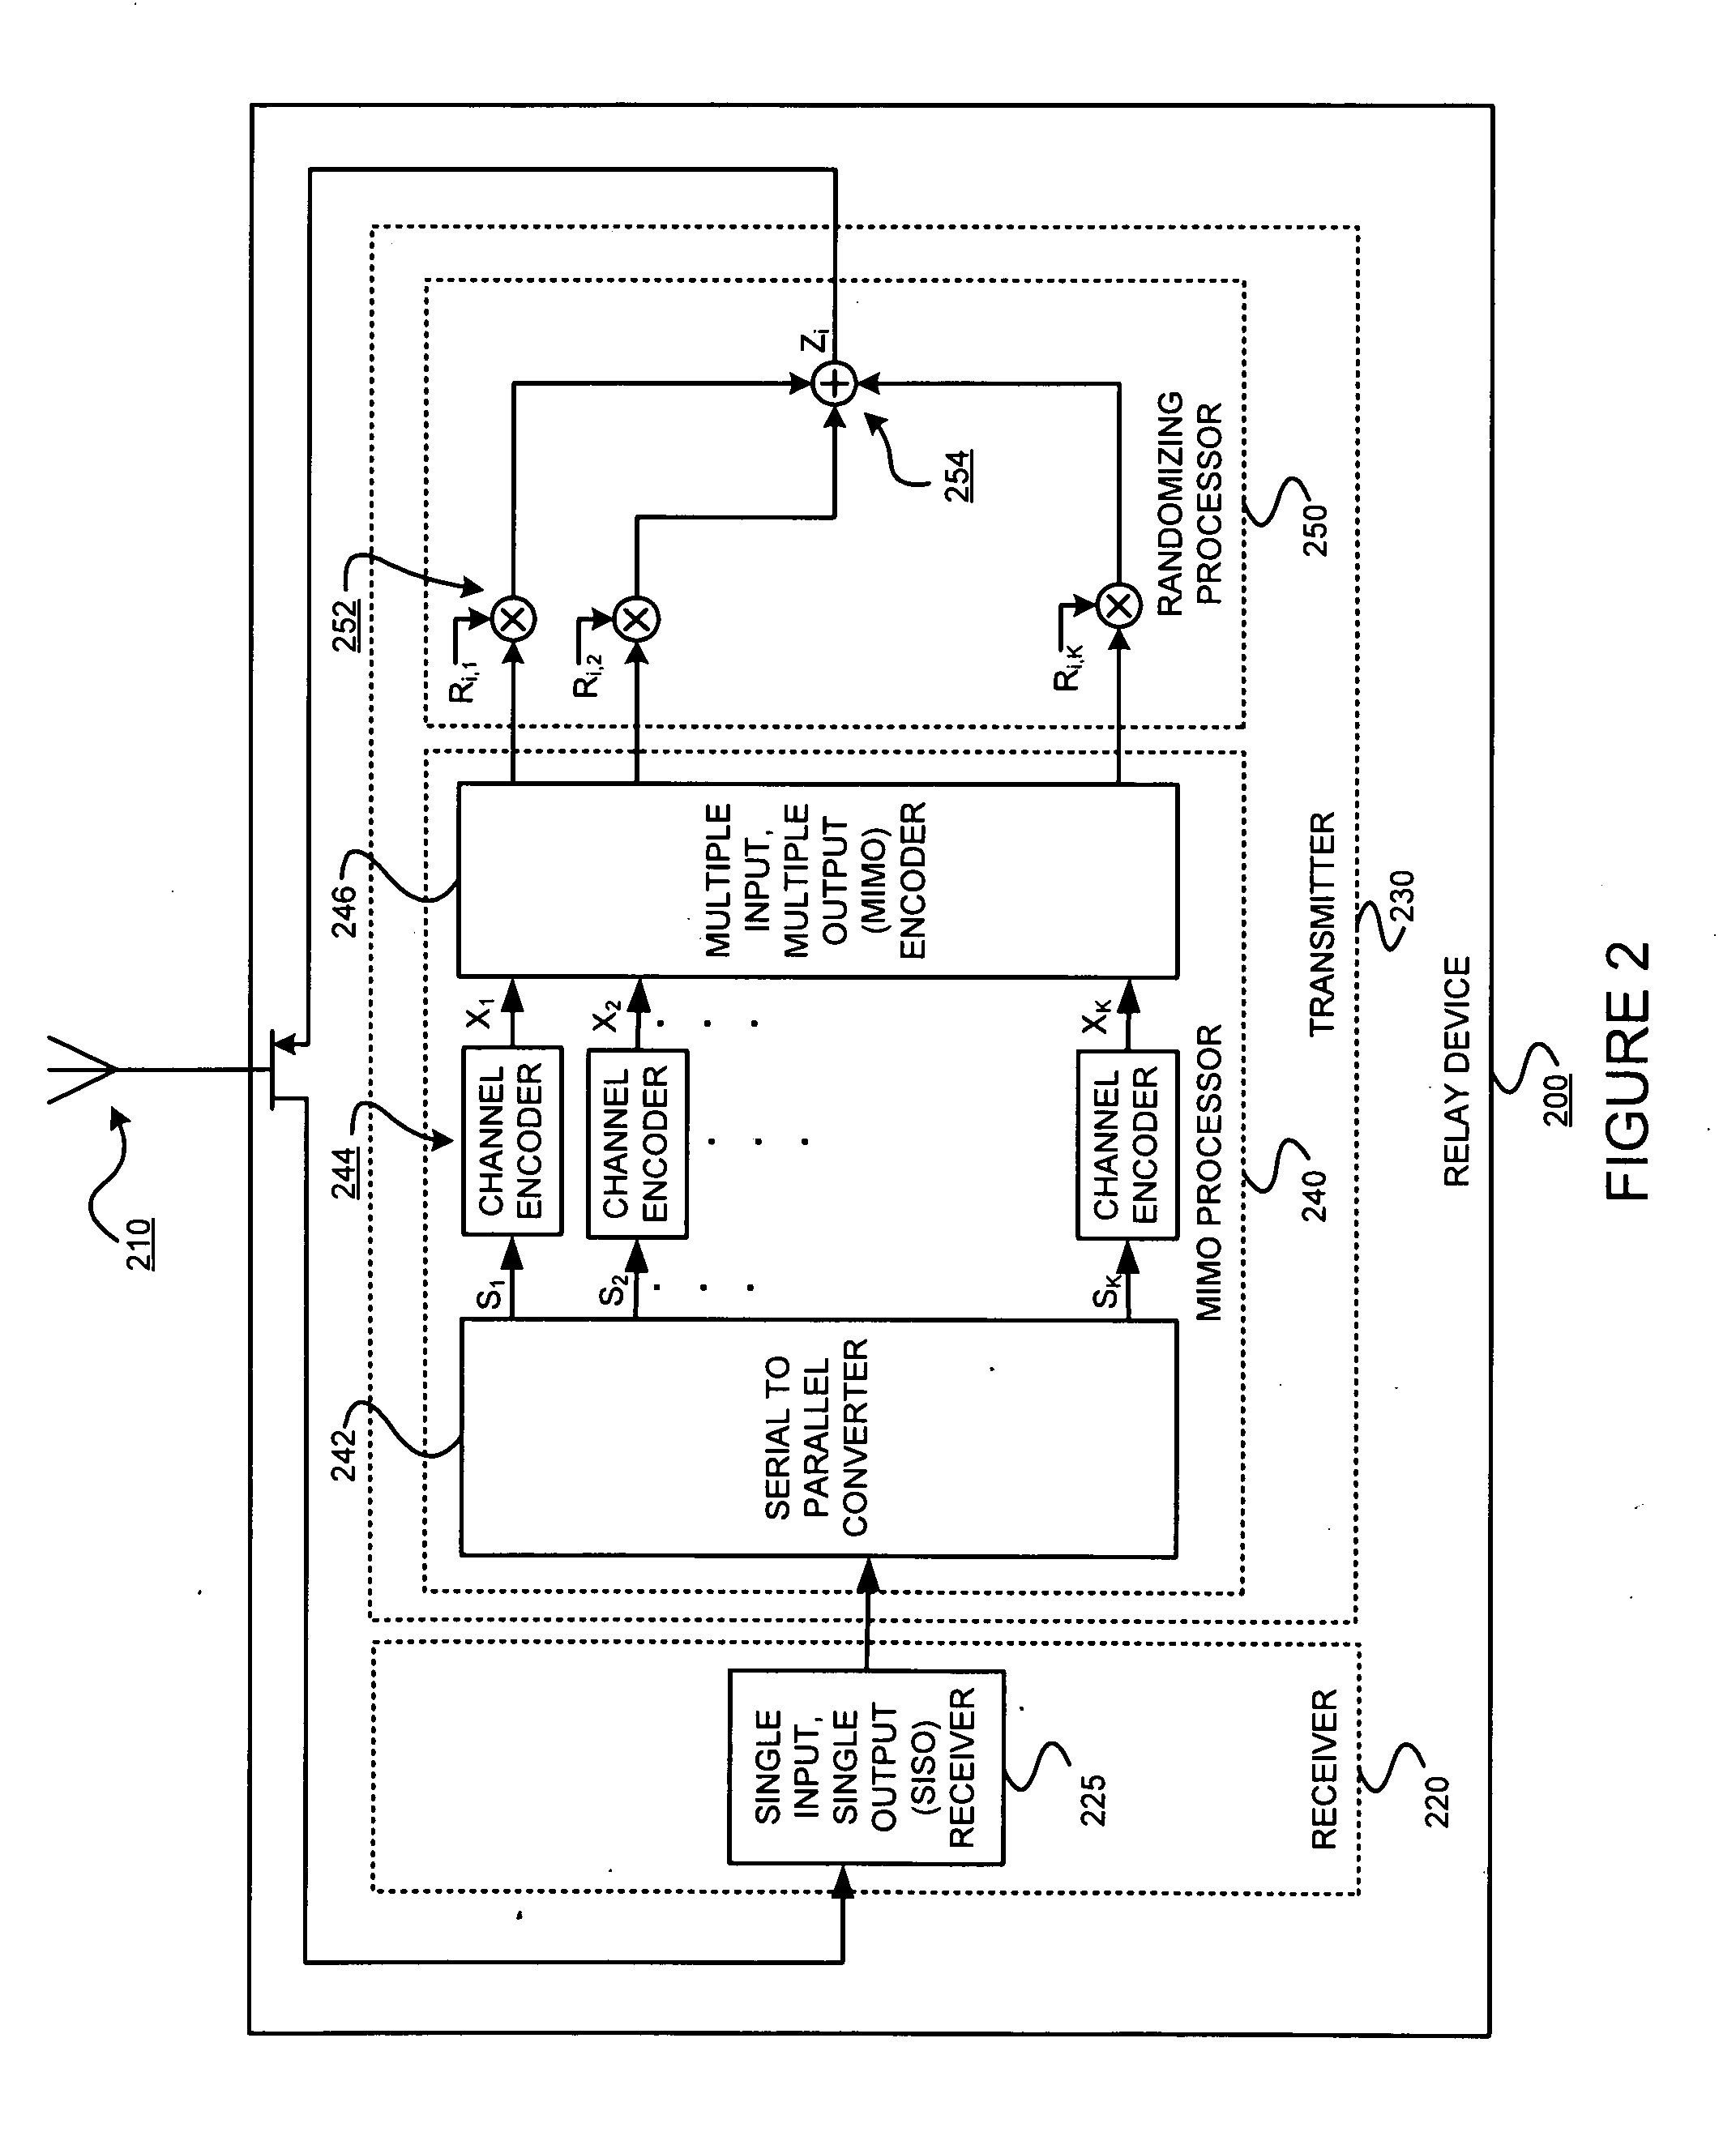 Spatial multiplexing gain for a distributed cooperative communications system using randomized coding